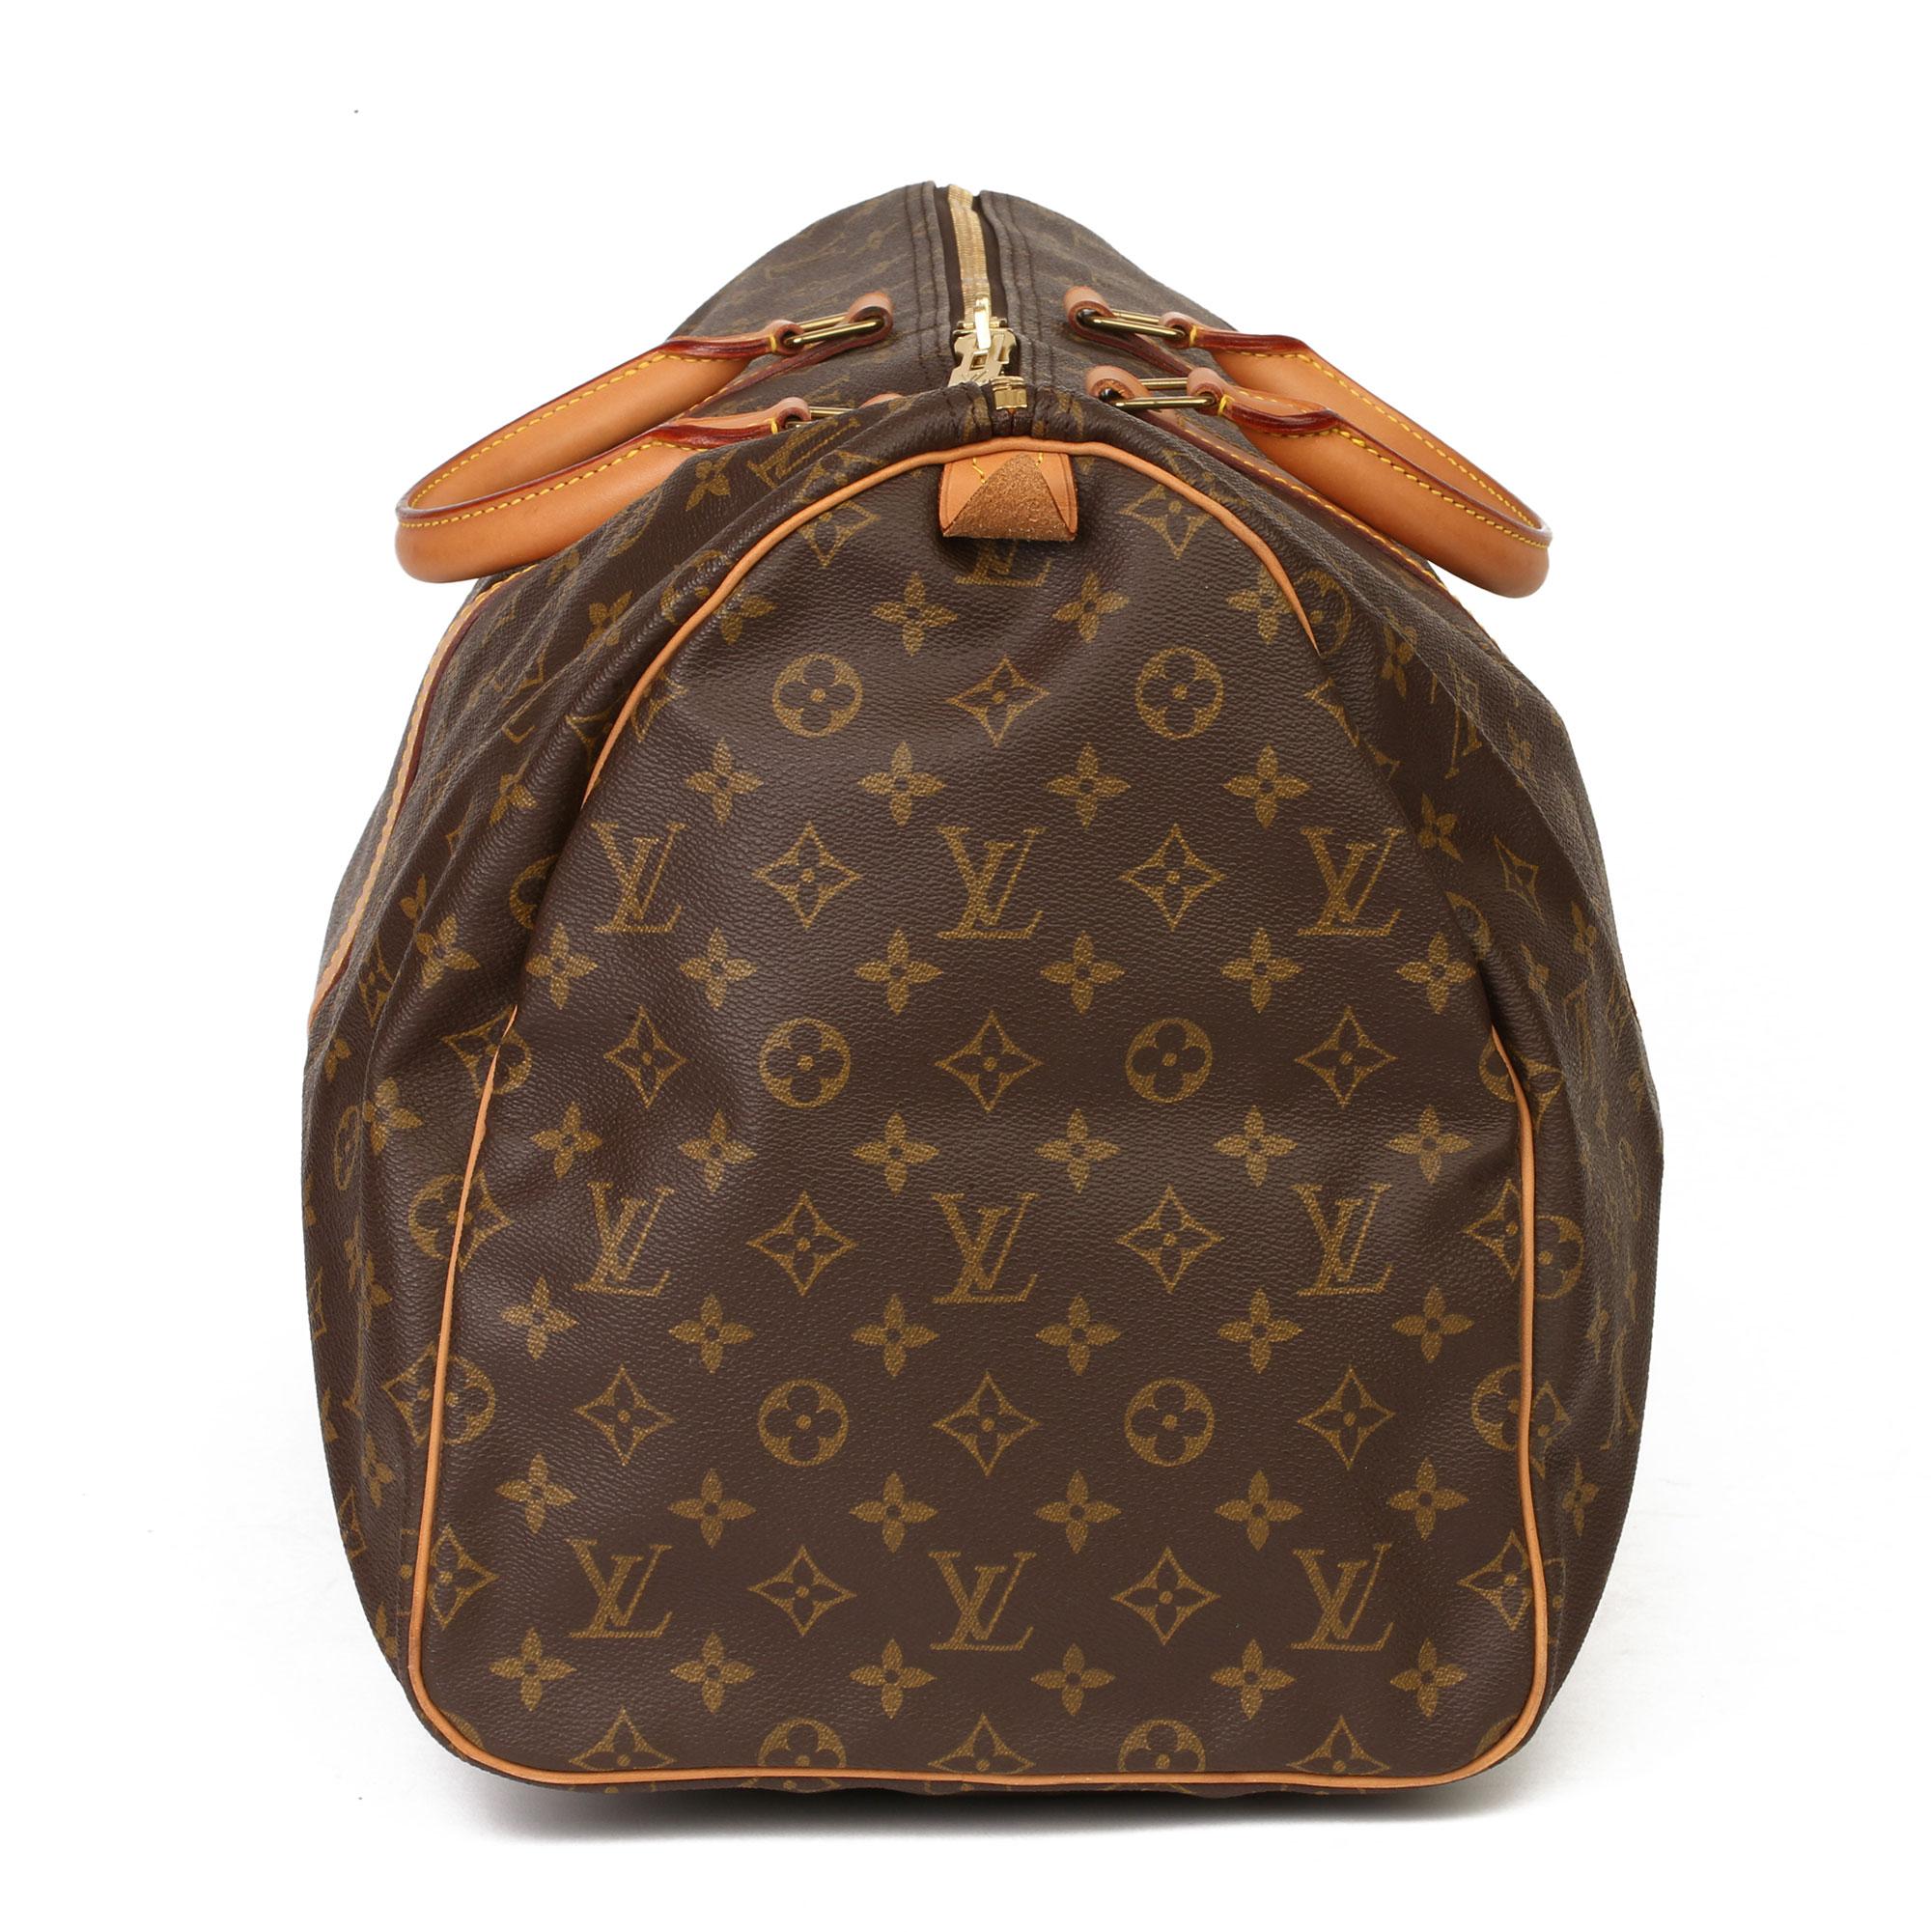 LOUIS VUITTON
Brown Monogram Coated Canvas & Vachetta Leather Vintage Keepall 55

Xupes Reference: HB3703
Serial Number: MI0972
Age (Circa): 1992
Authenticity Details: Date Stamp (Made in France) 
Gender: Unisex
Type: Travel

Colour: Brown
Hardware: